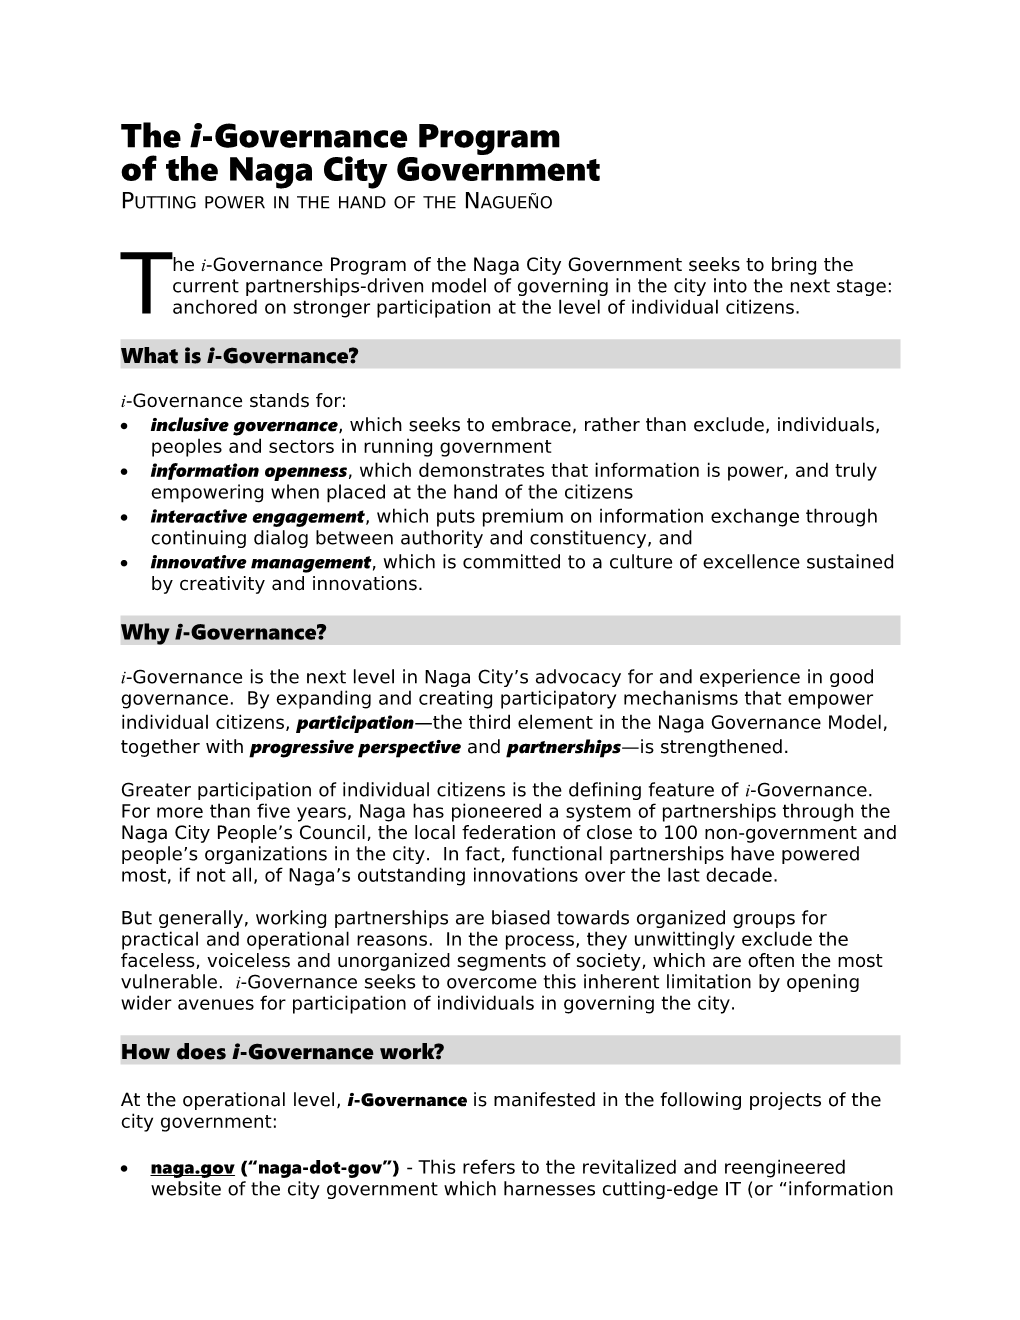 The I-Governance Project of the Naga City Government